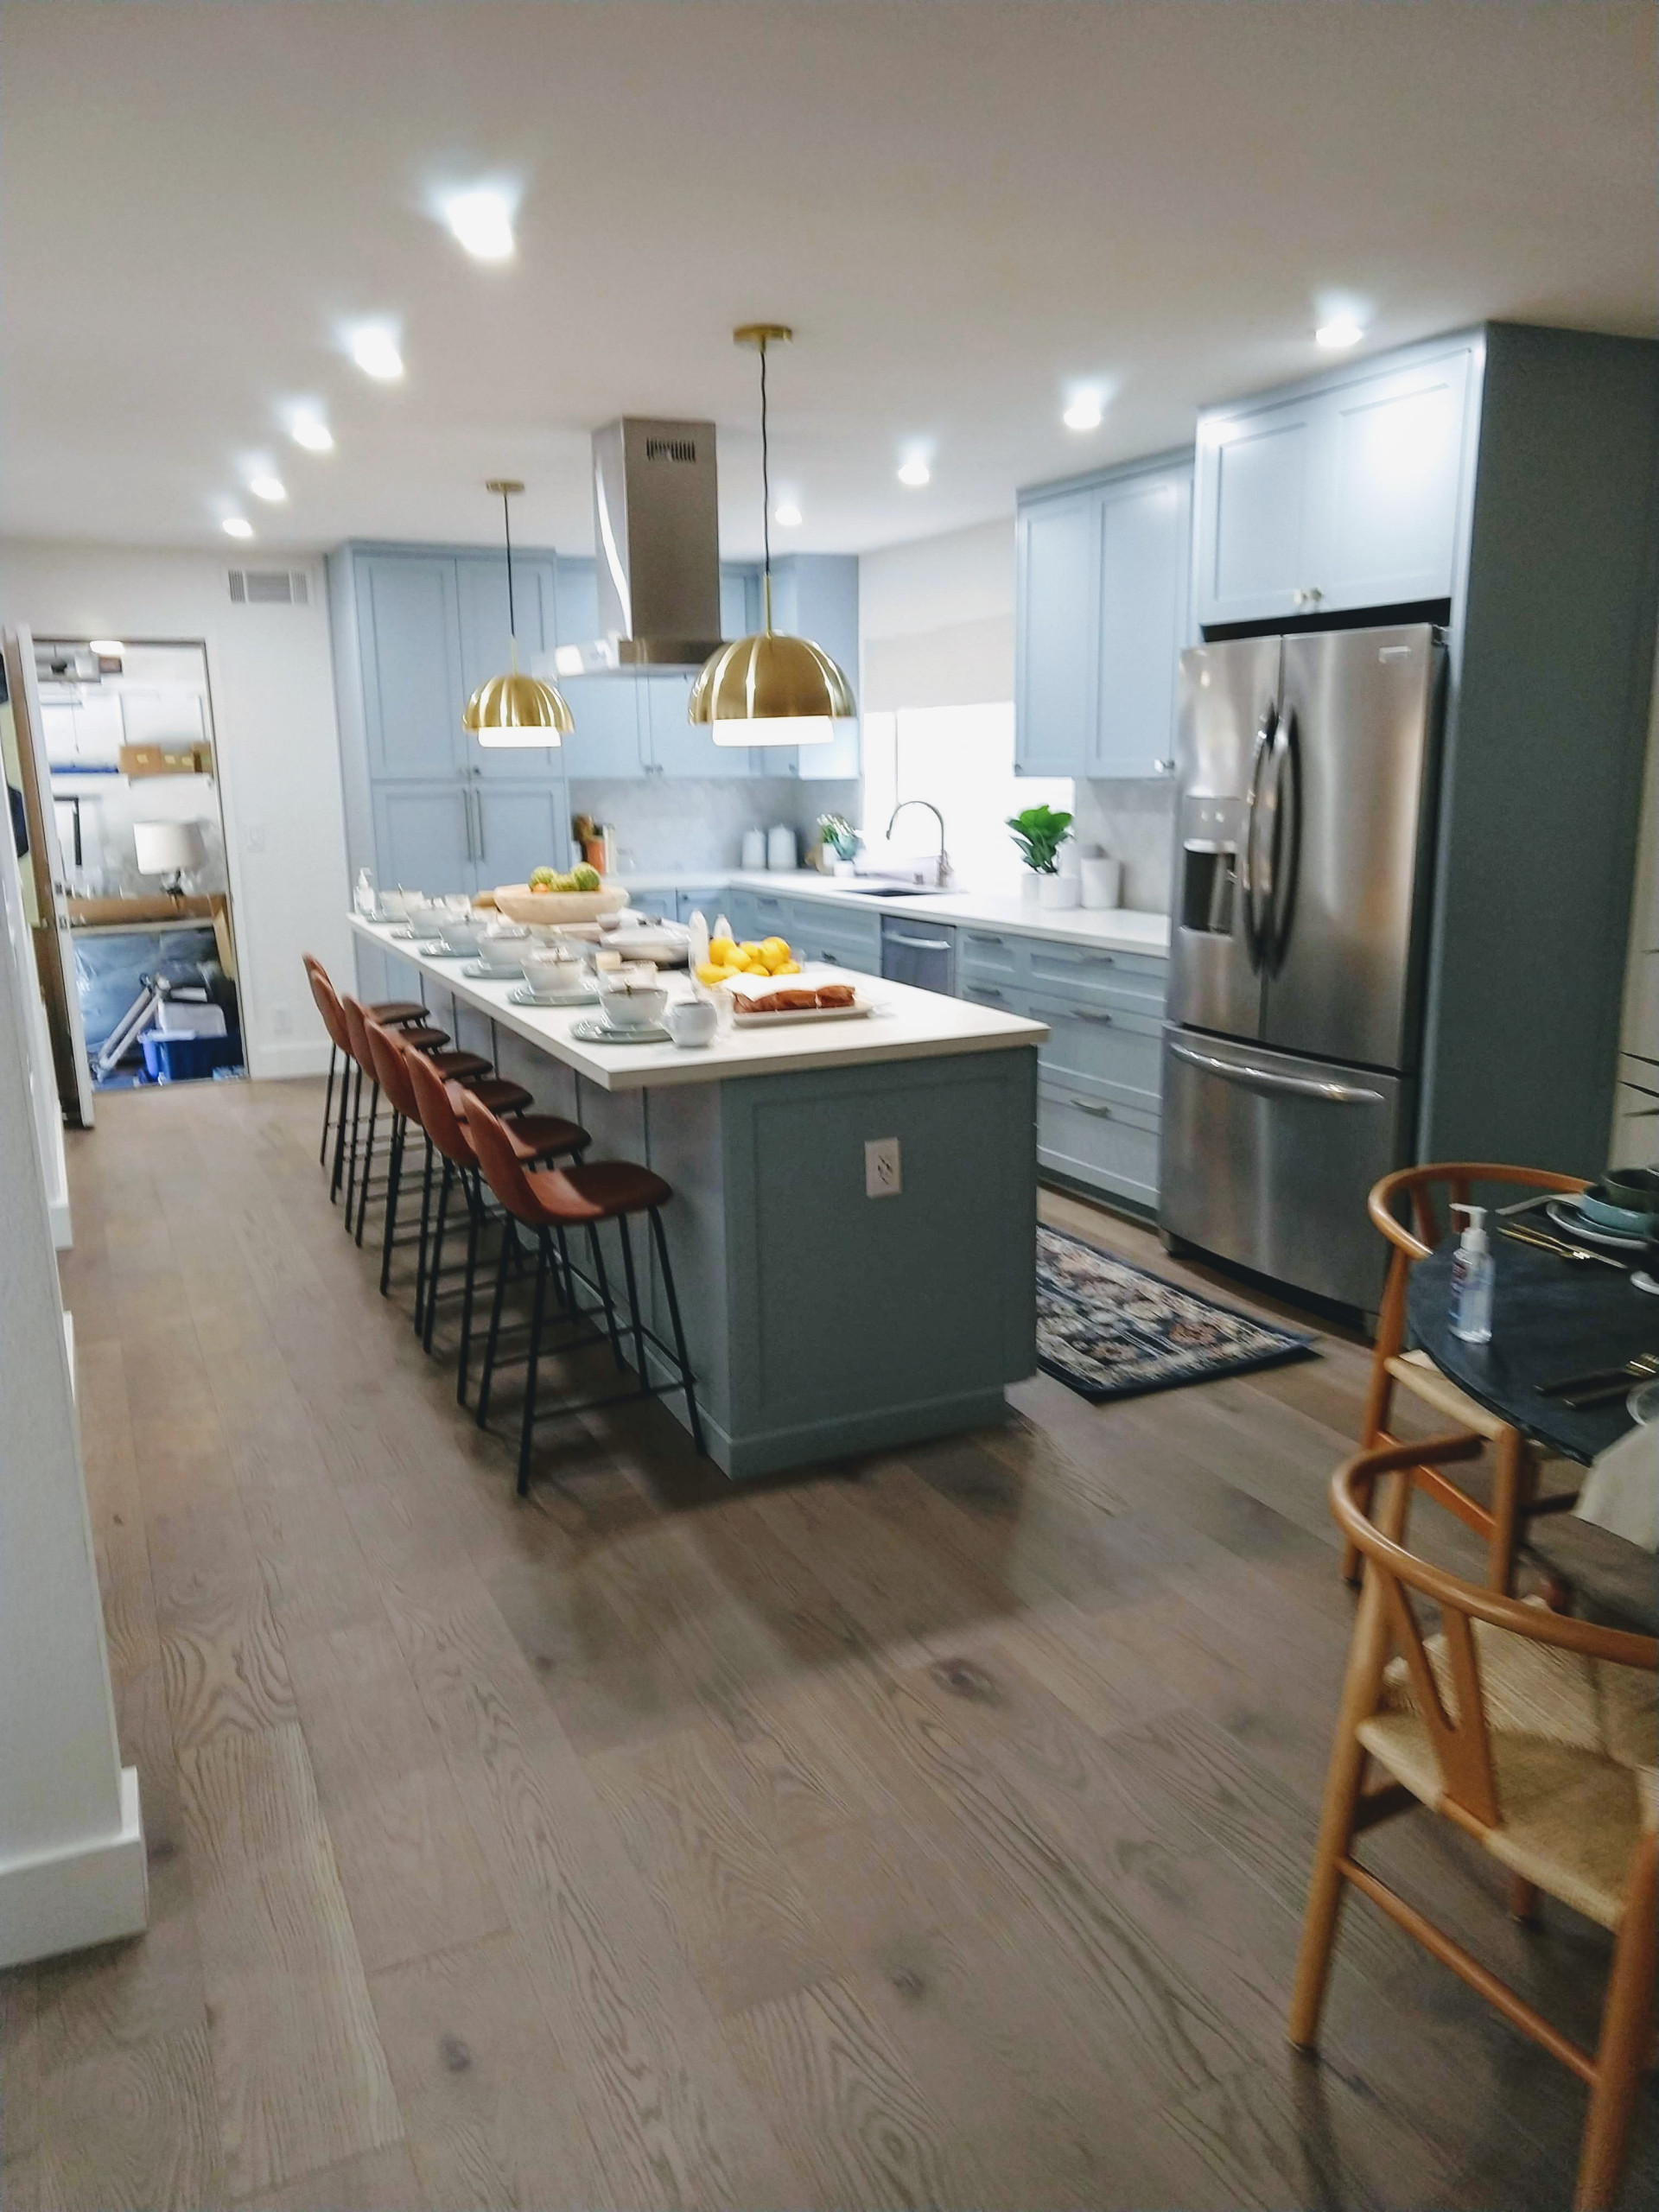 Property Brothers Forever Home - Season 5 - Ep 13 - Glassell Park